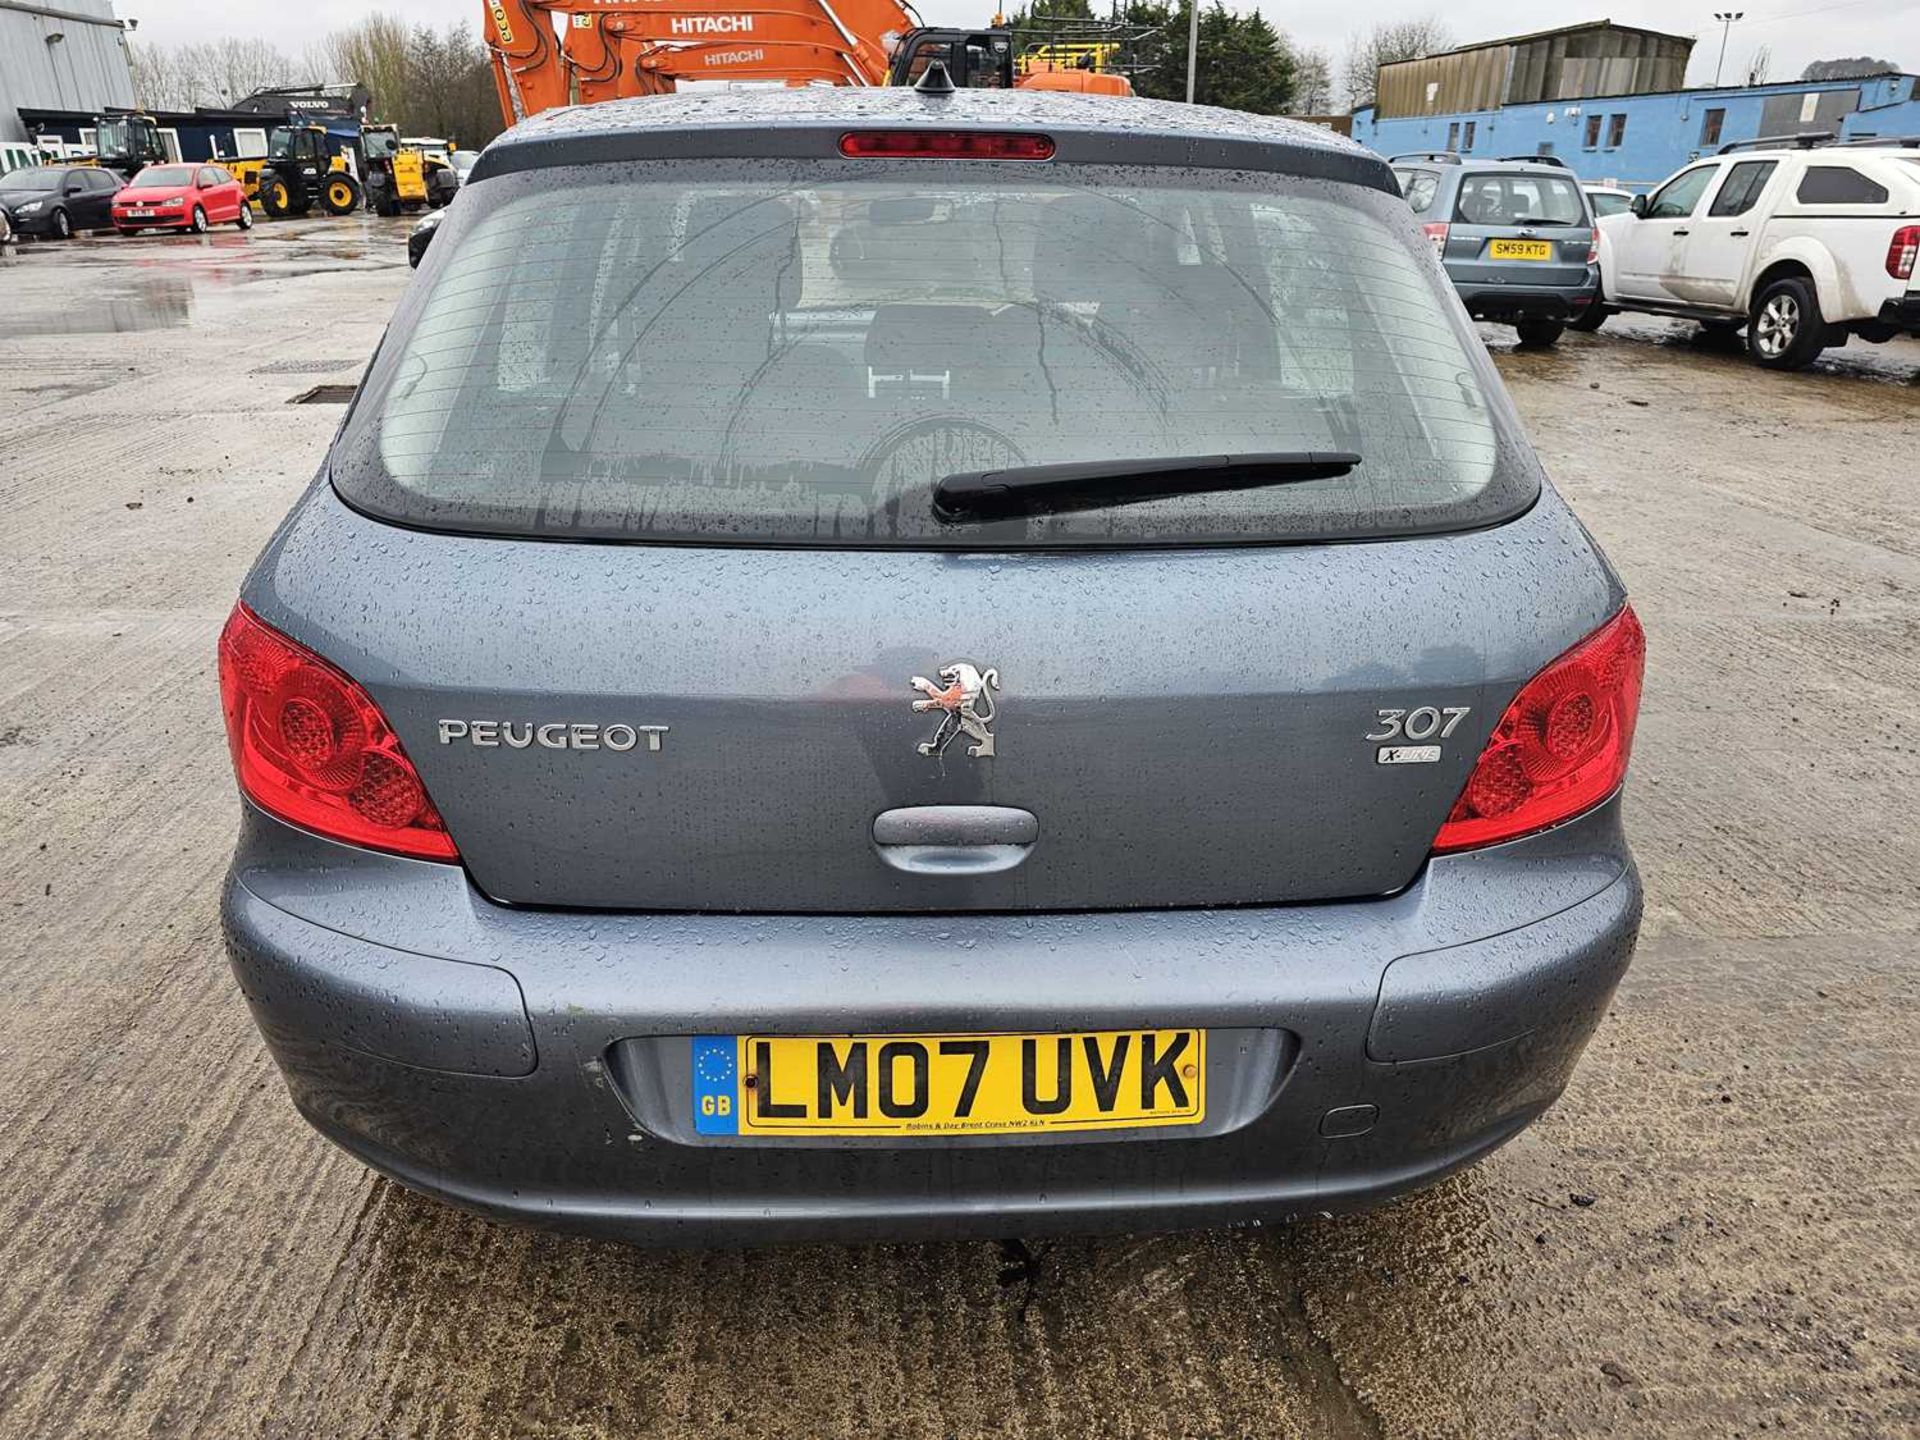 2007 Peugeot 307 X-line, 5 Speed, A/C (Reg. Docs. Available, Tested 11/24) - Image 5 of 28